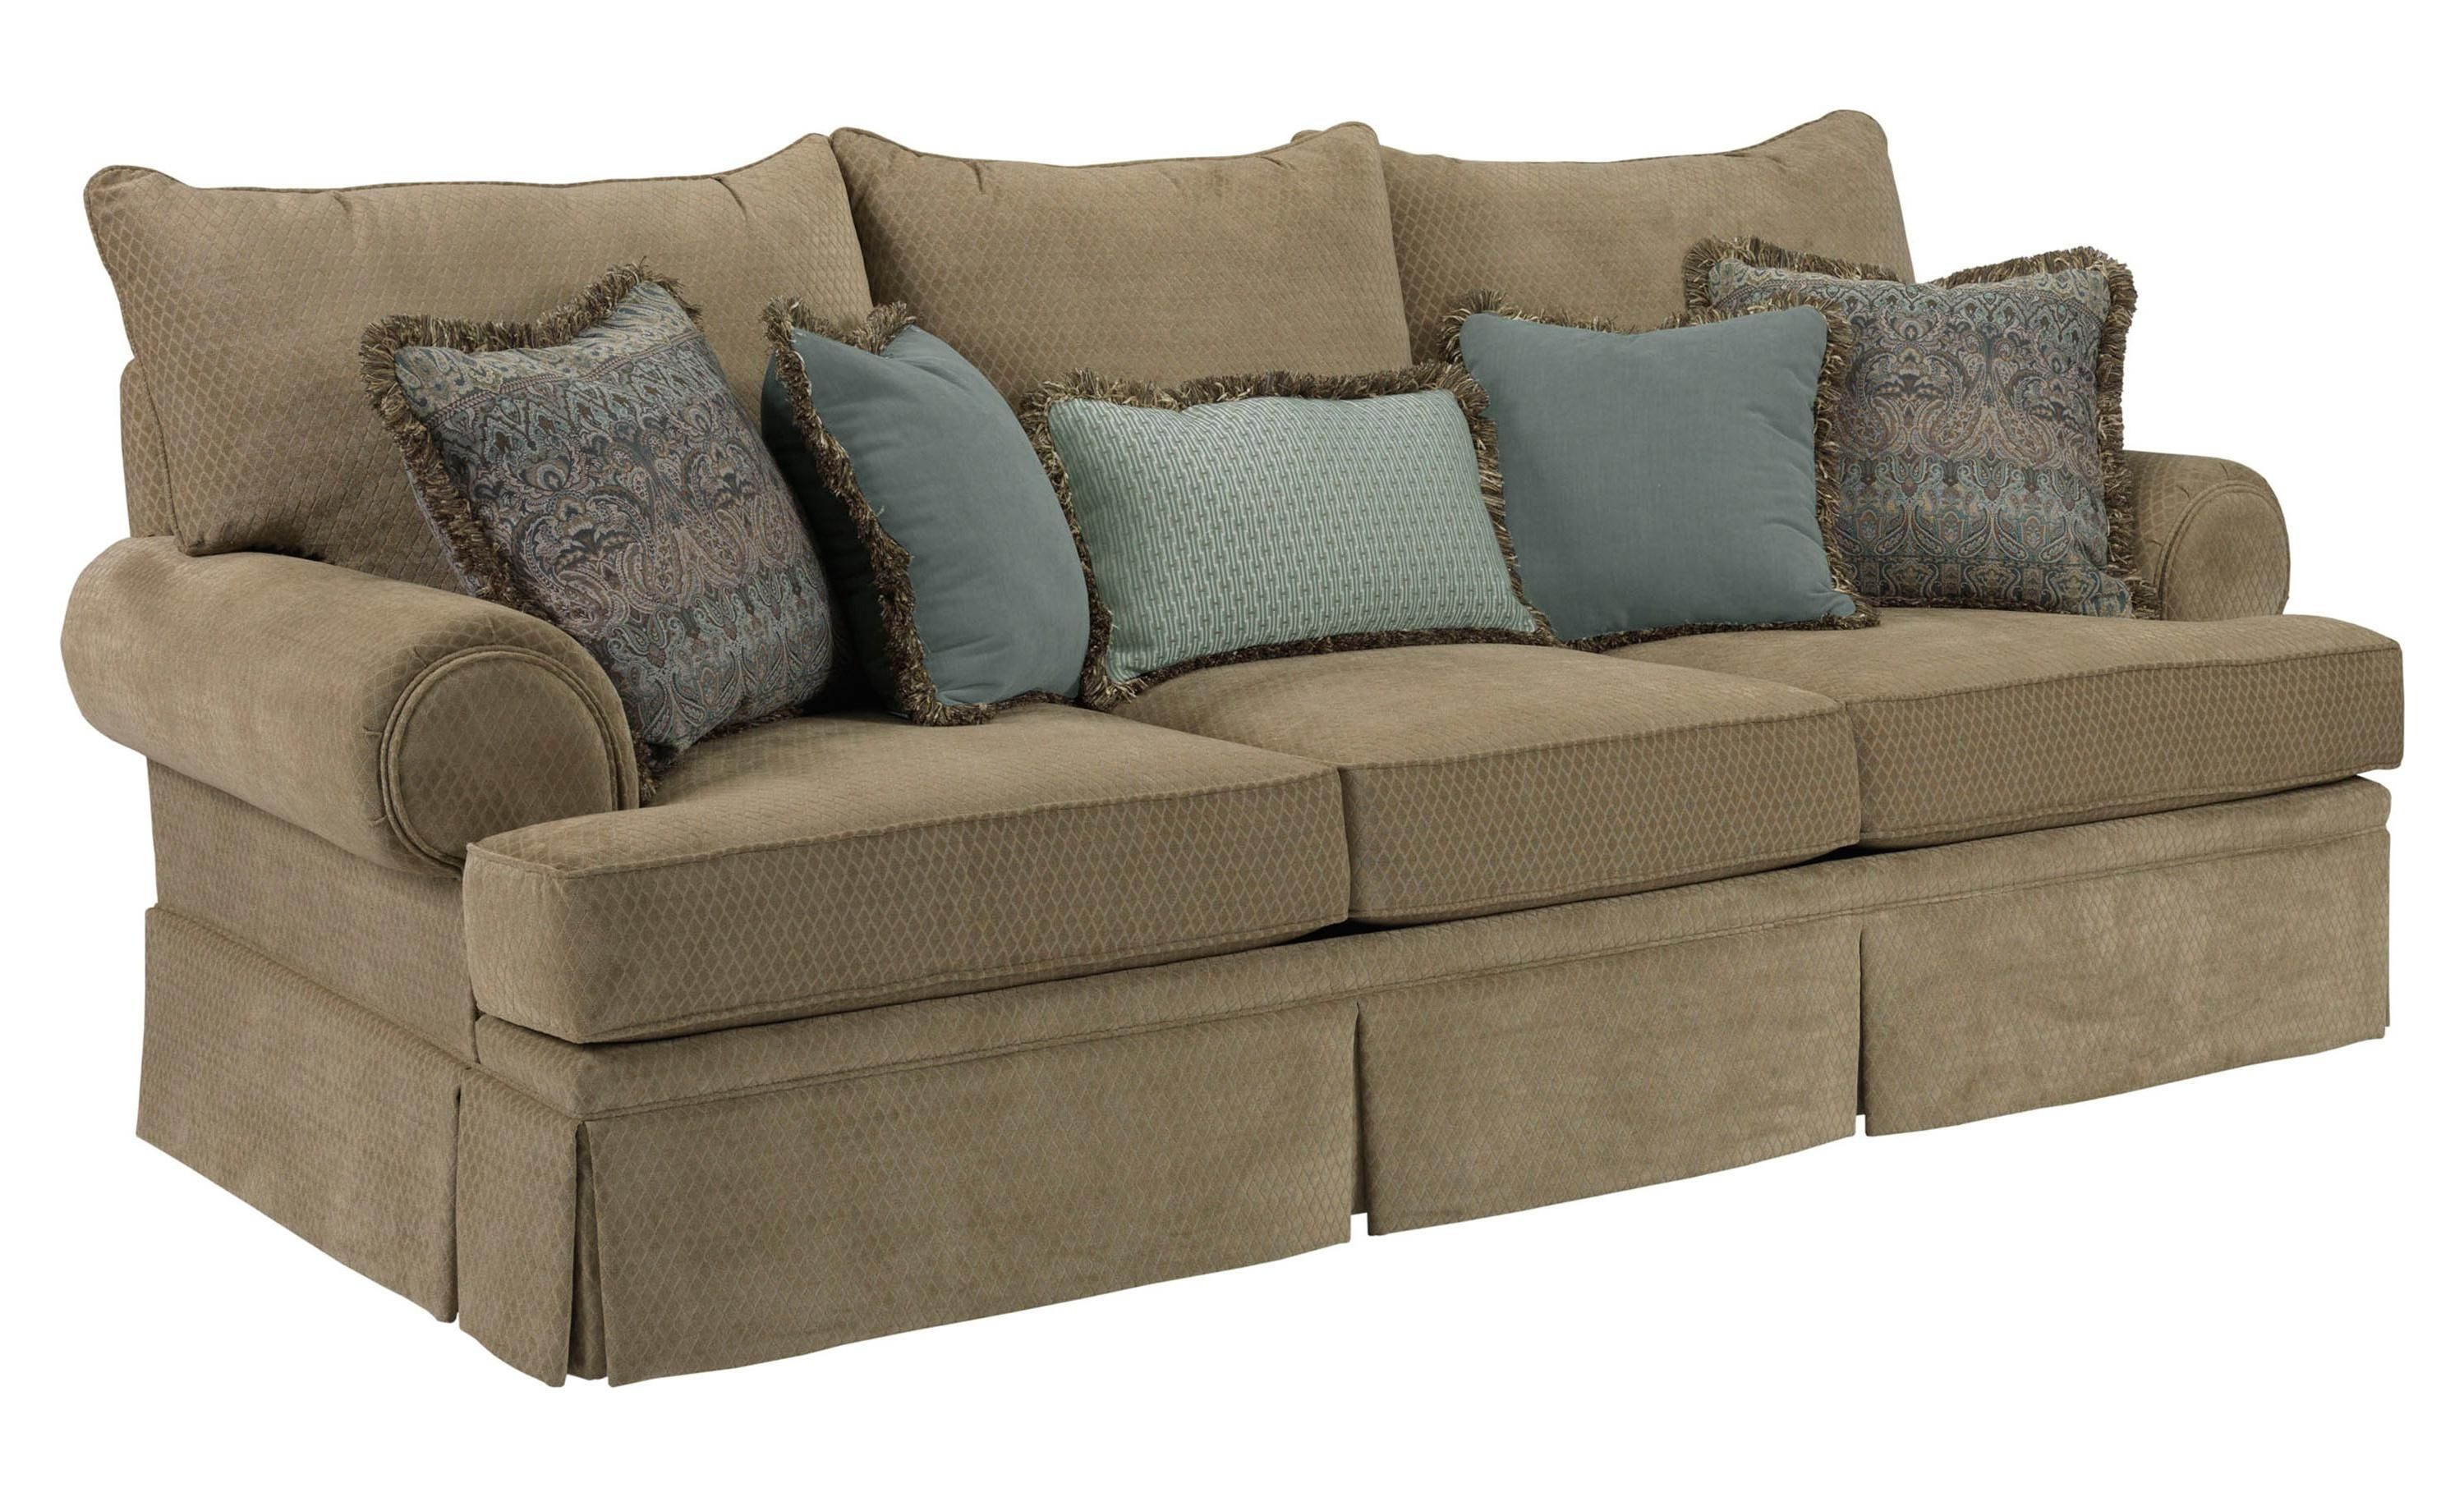 Broyhill Furniture Helena Traditional Skirted Sofa With Rolled Arms With Quincy Il Sectional Sofas (View 8 of 10)